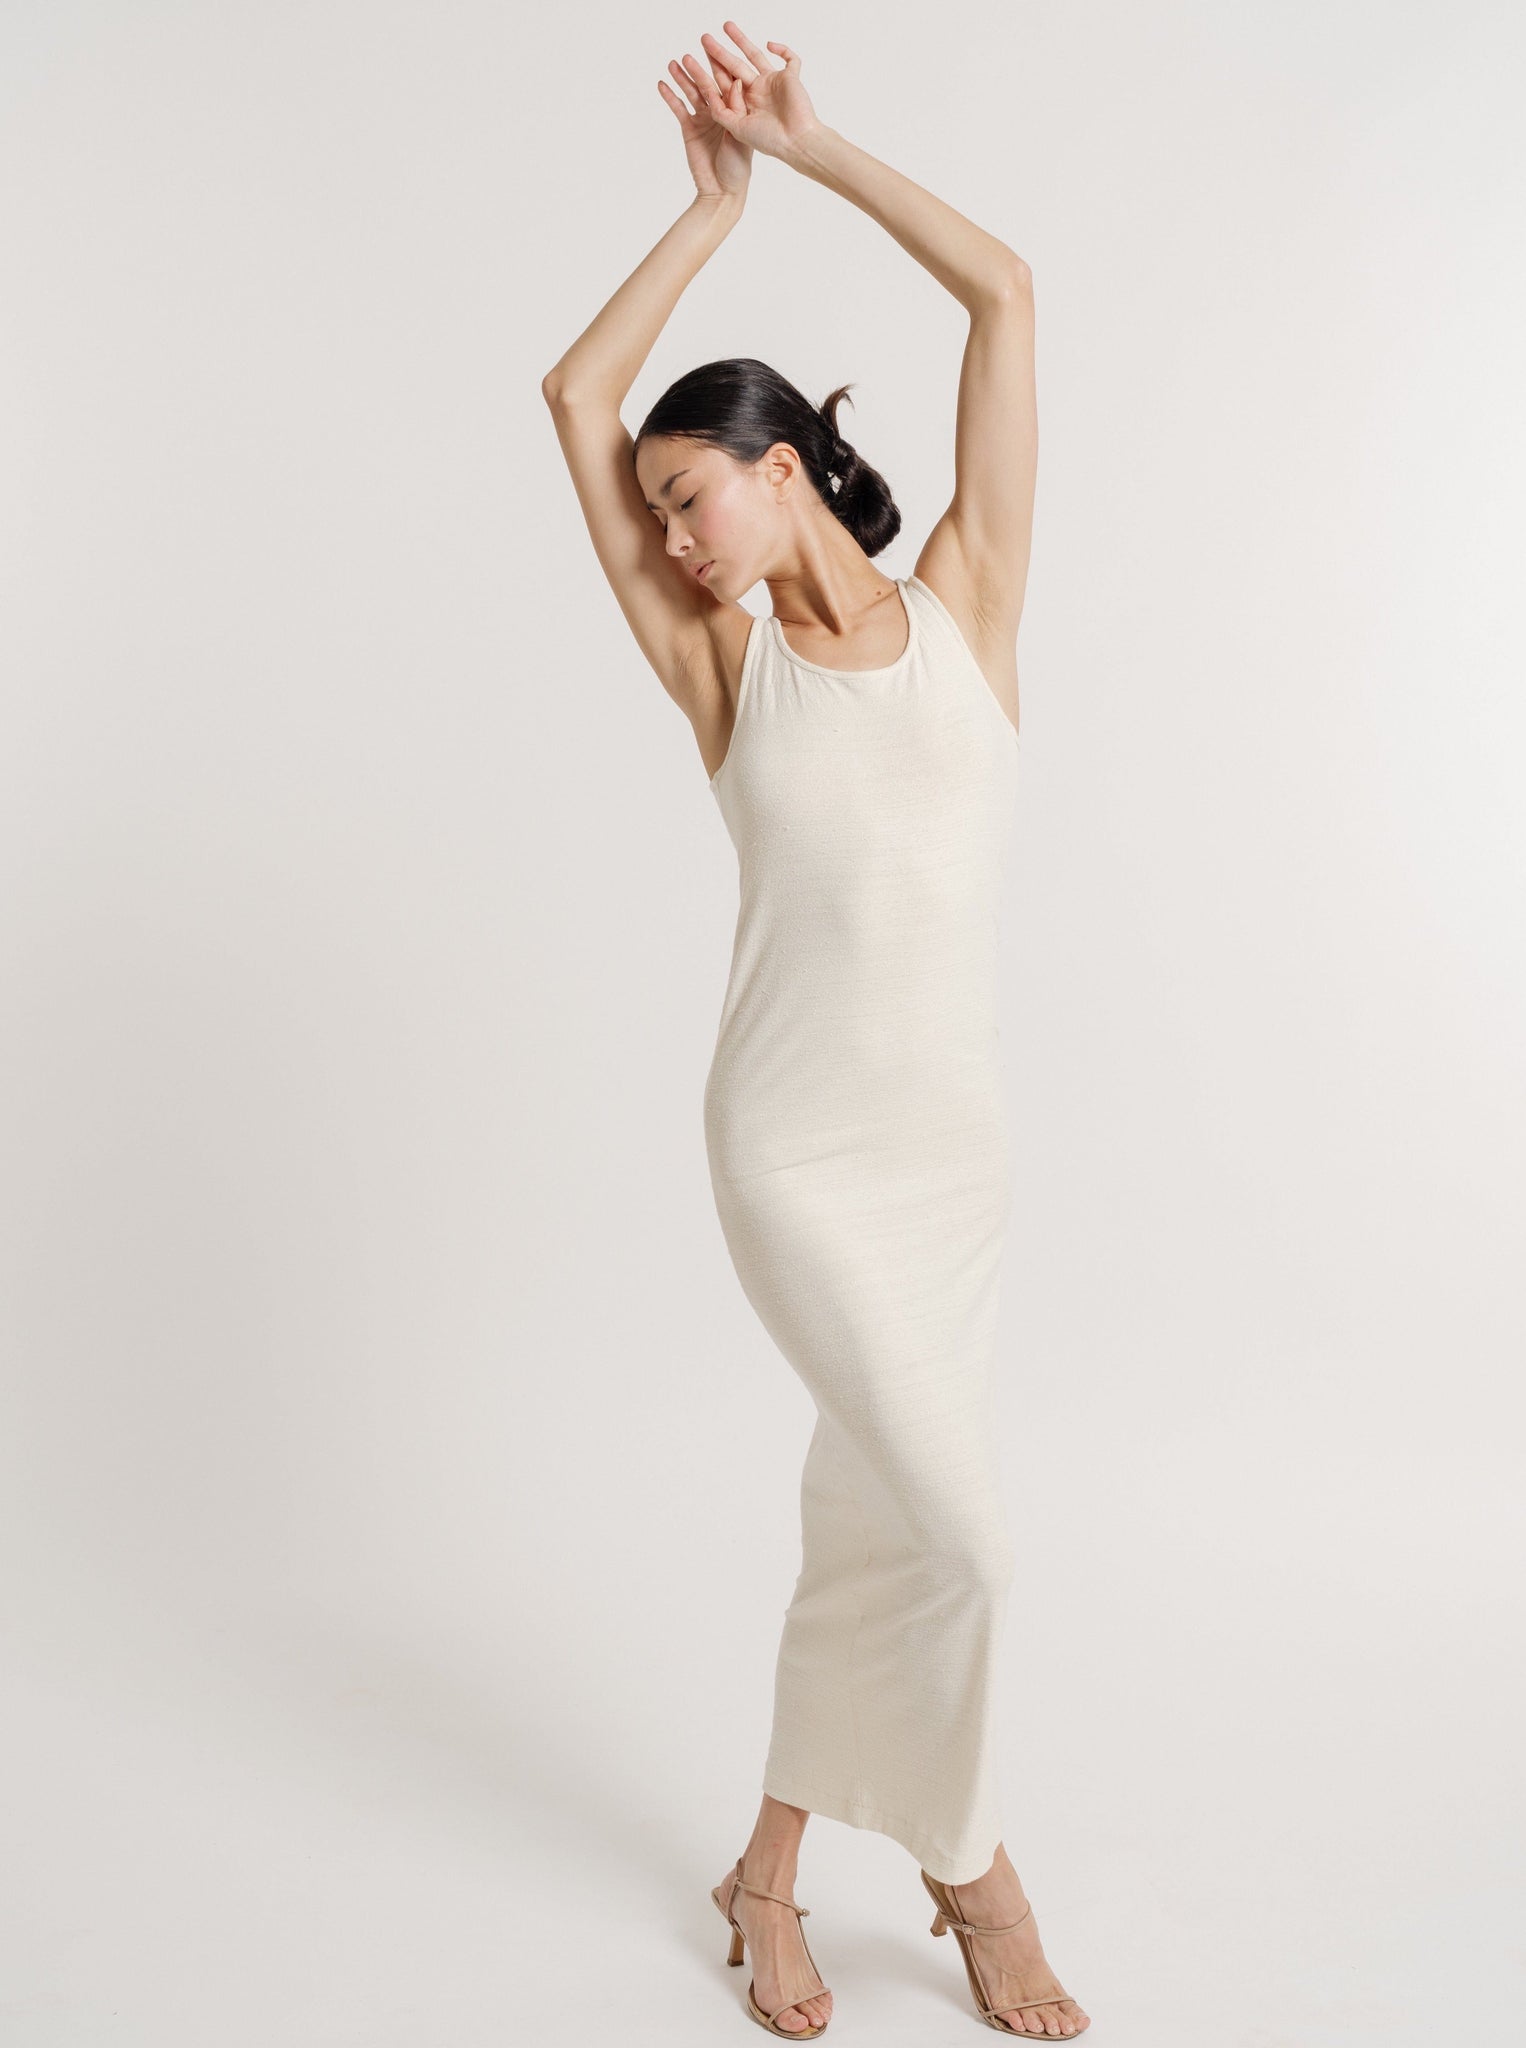 The model is wearing a sustainable, one-of-a-kind Jersey Knit Tank Dress - Ivory Silk Noil - Pre-order in cream.